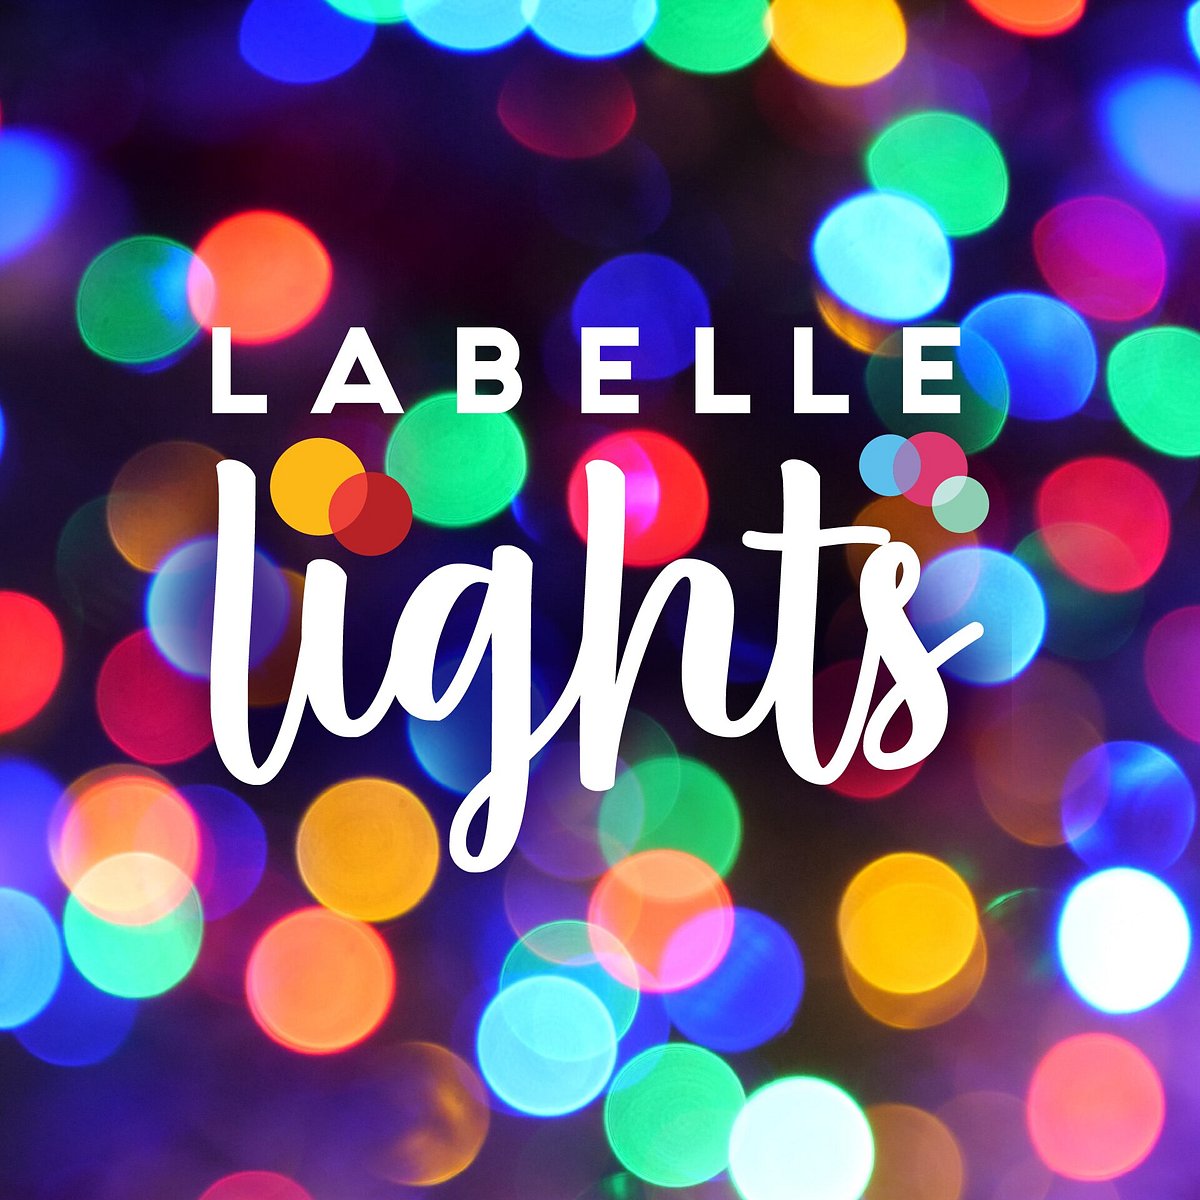 LABELLE LIGHTS AT LABELLE WINERY (Derry) All You Need to Know BEFORE